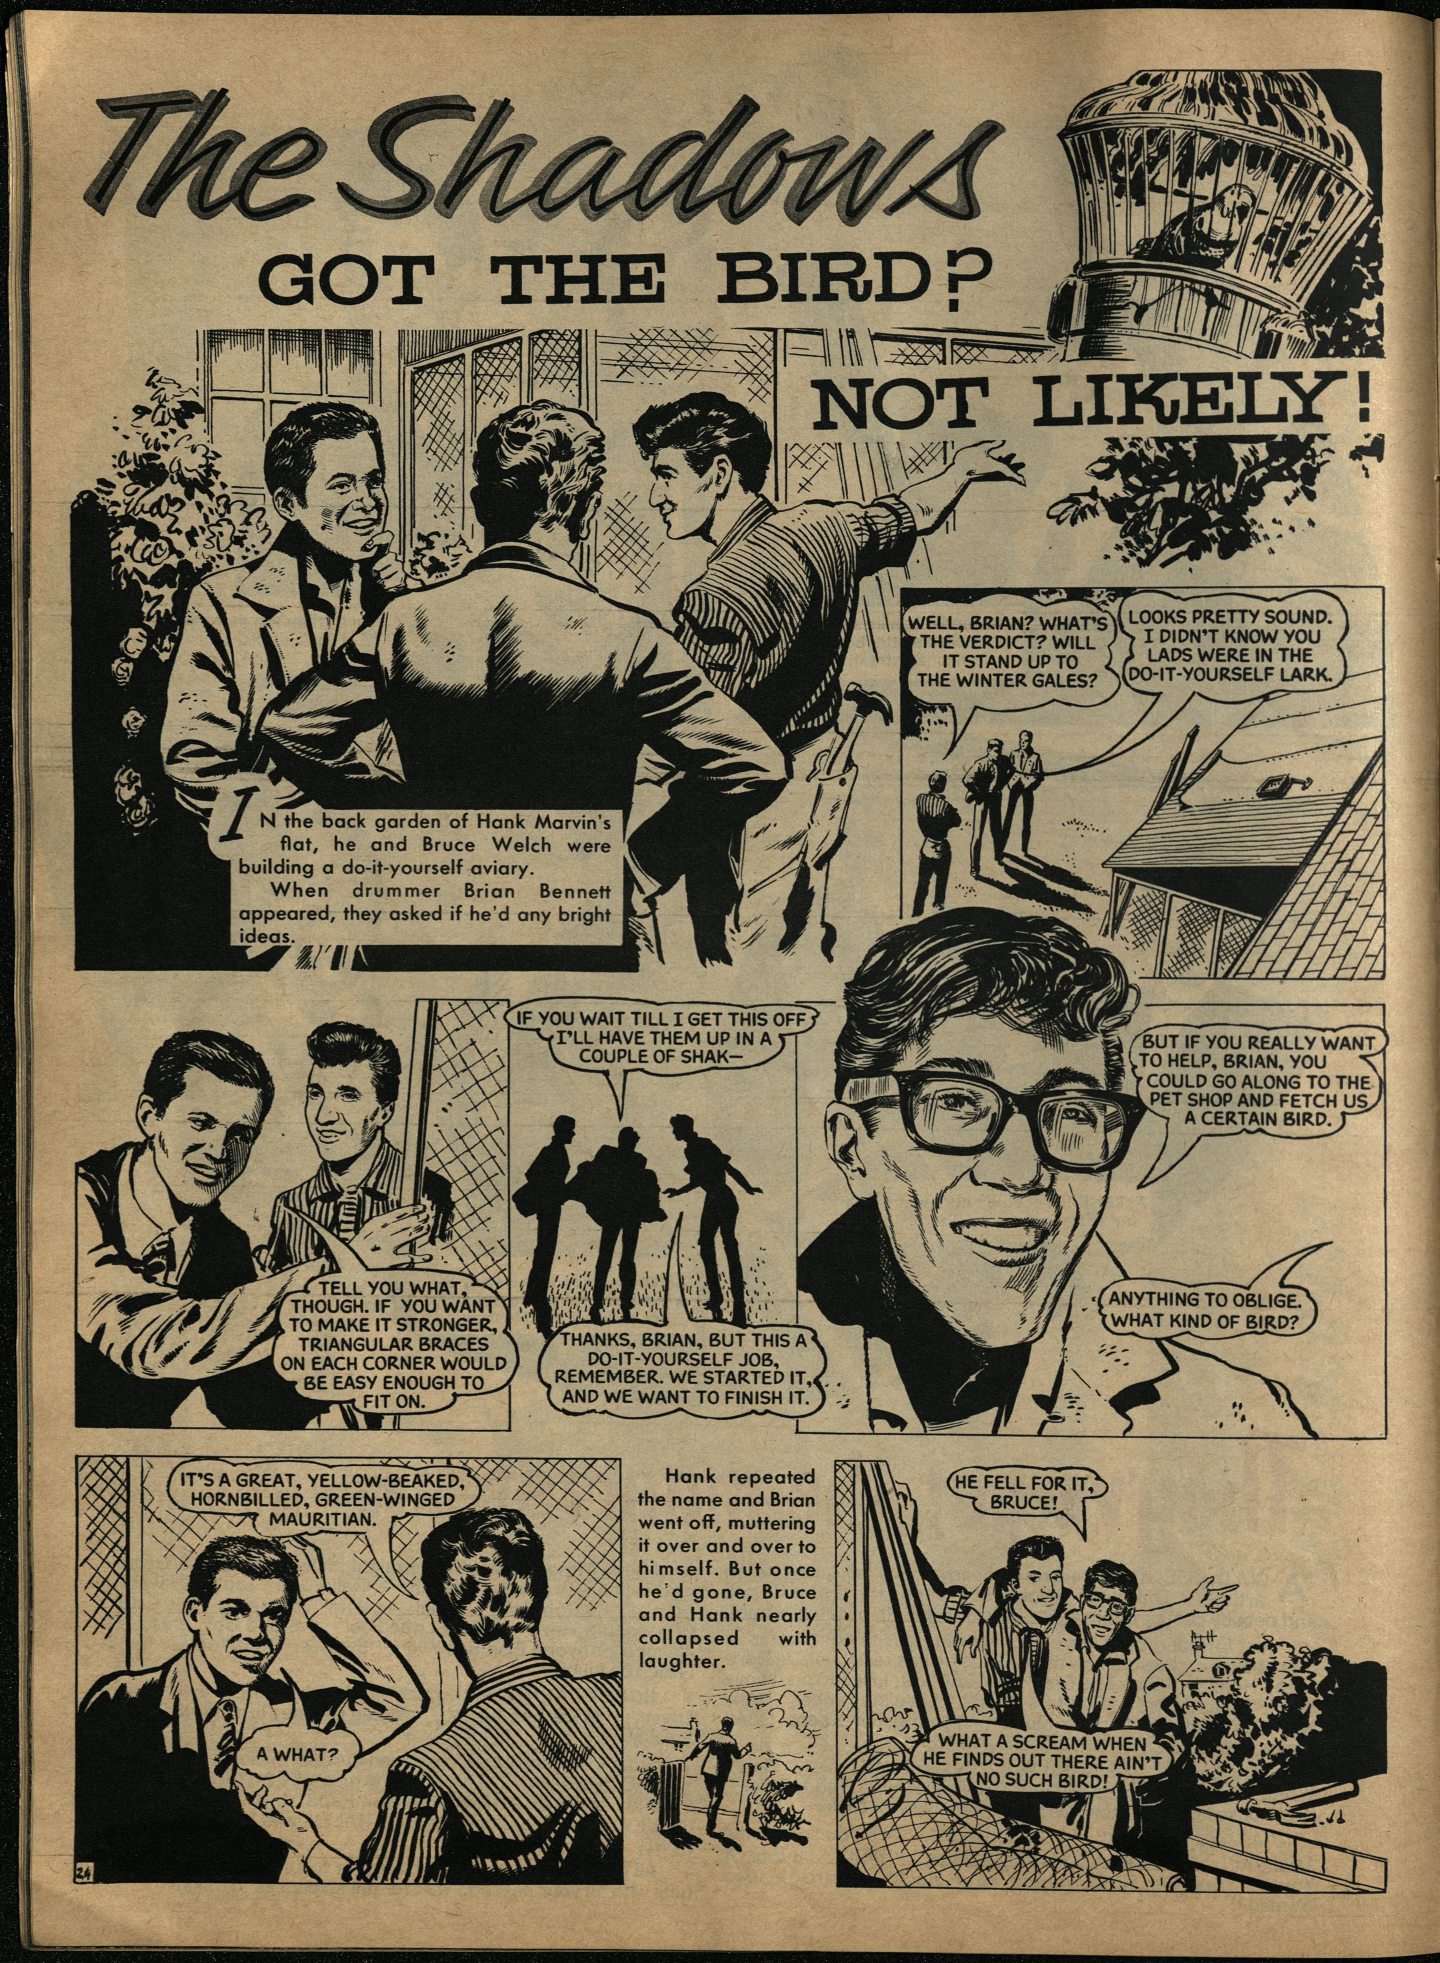 Elvis, Cliff and All featured a cartoon strip about Hank Marvin and The Shadows, pictured. 